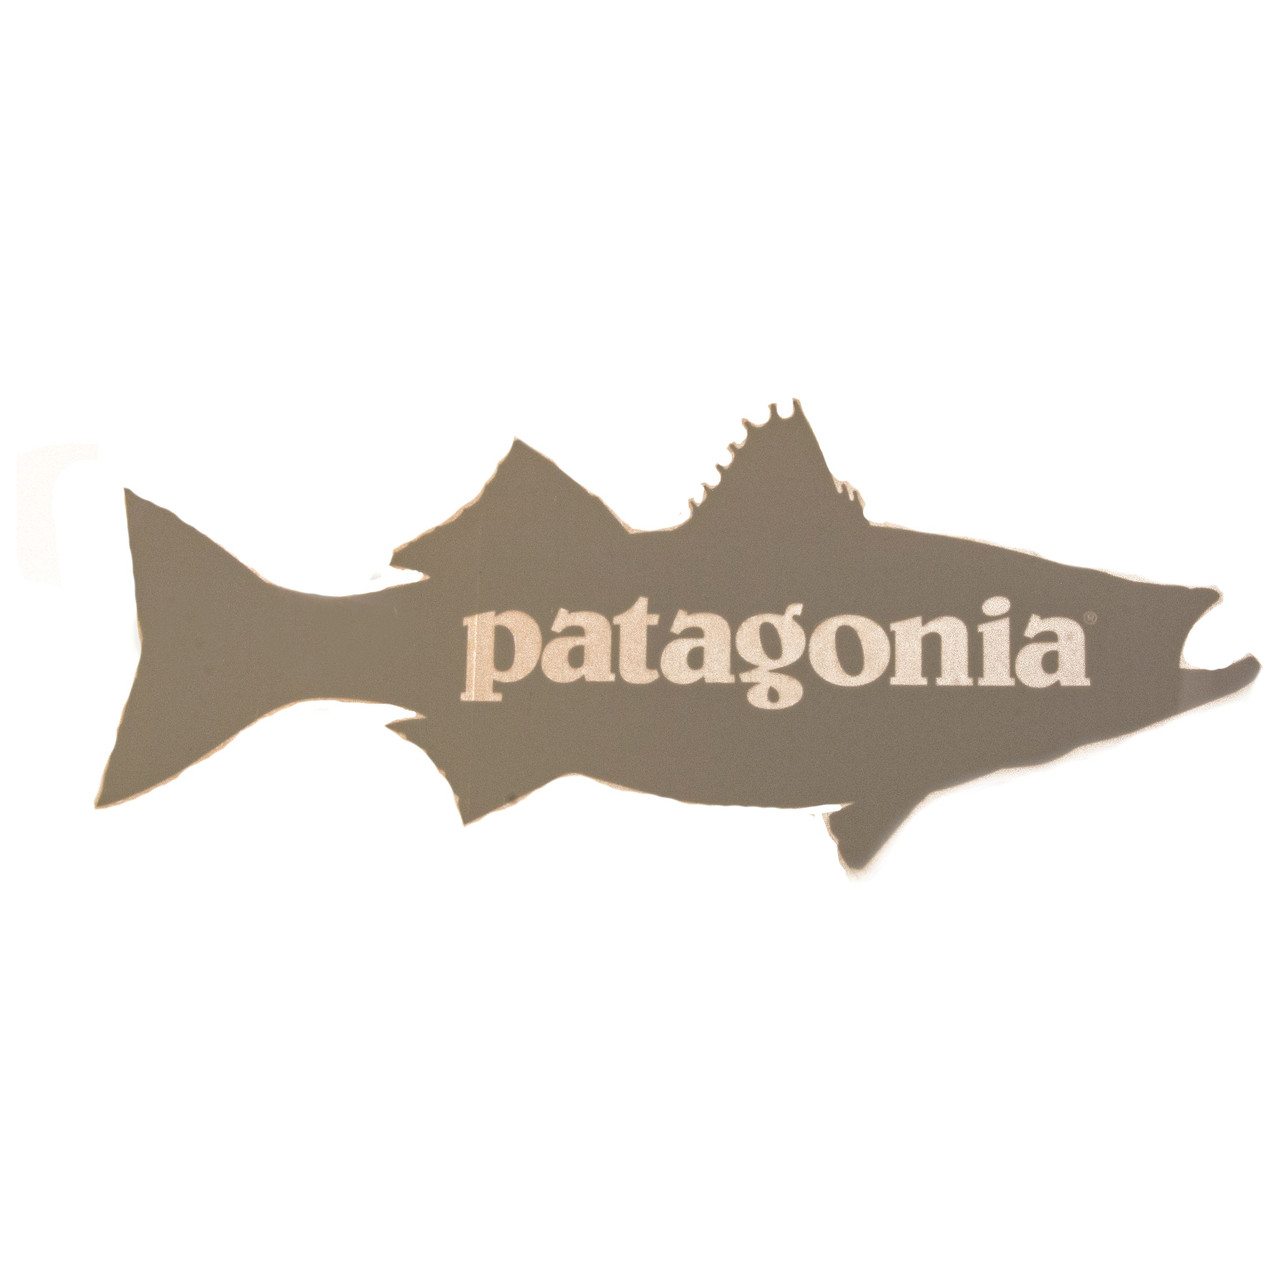 Patagonia Fly Fishing Logo Decal Sticker – Decalfly, 60% OFF